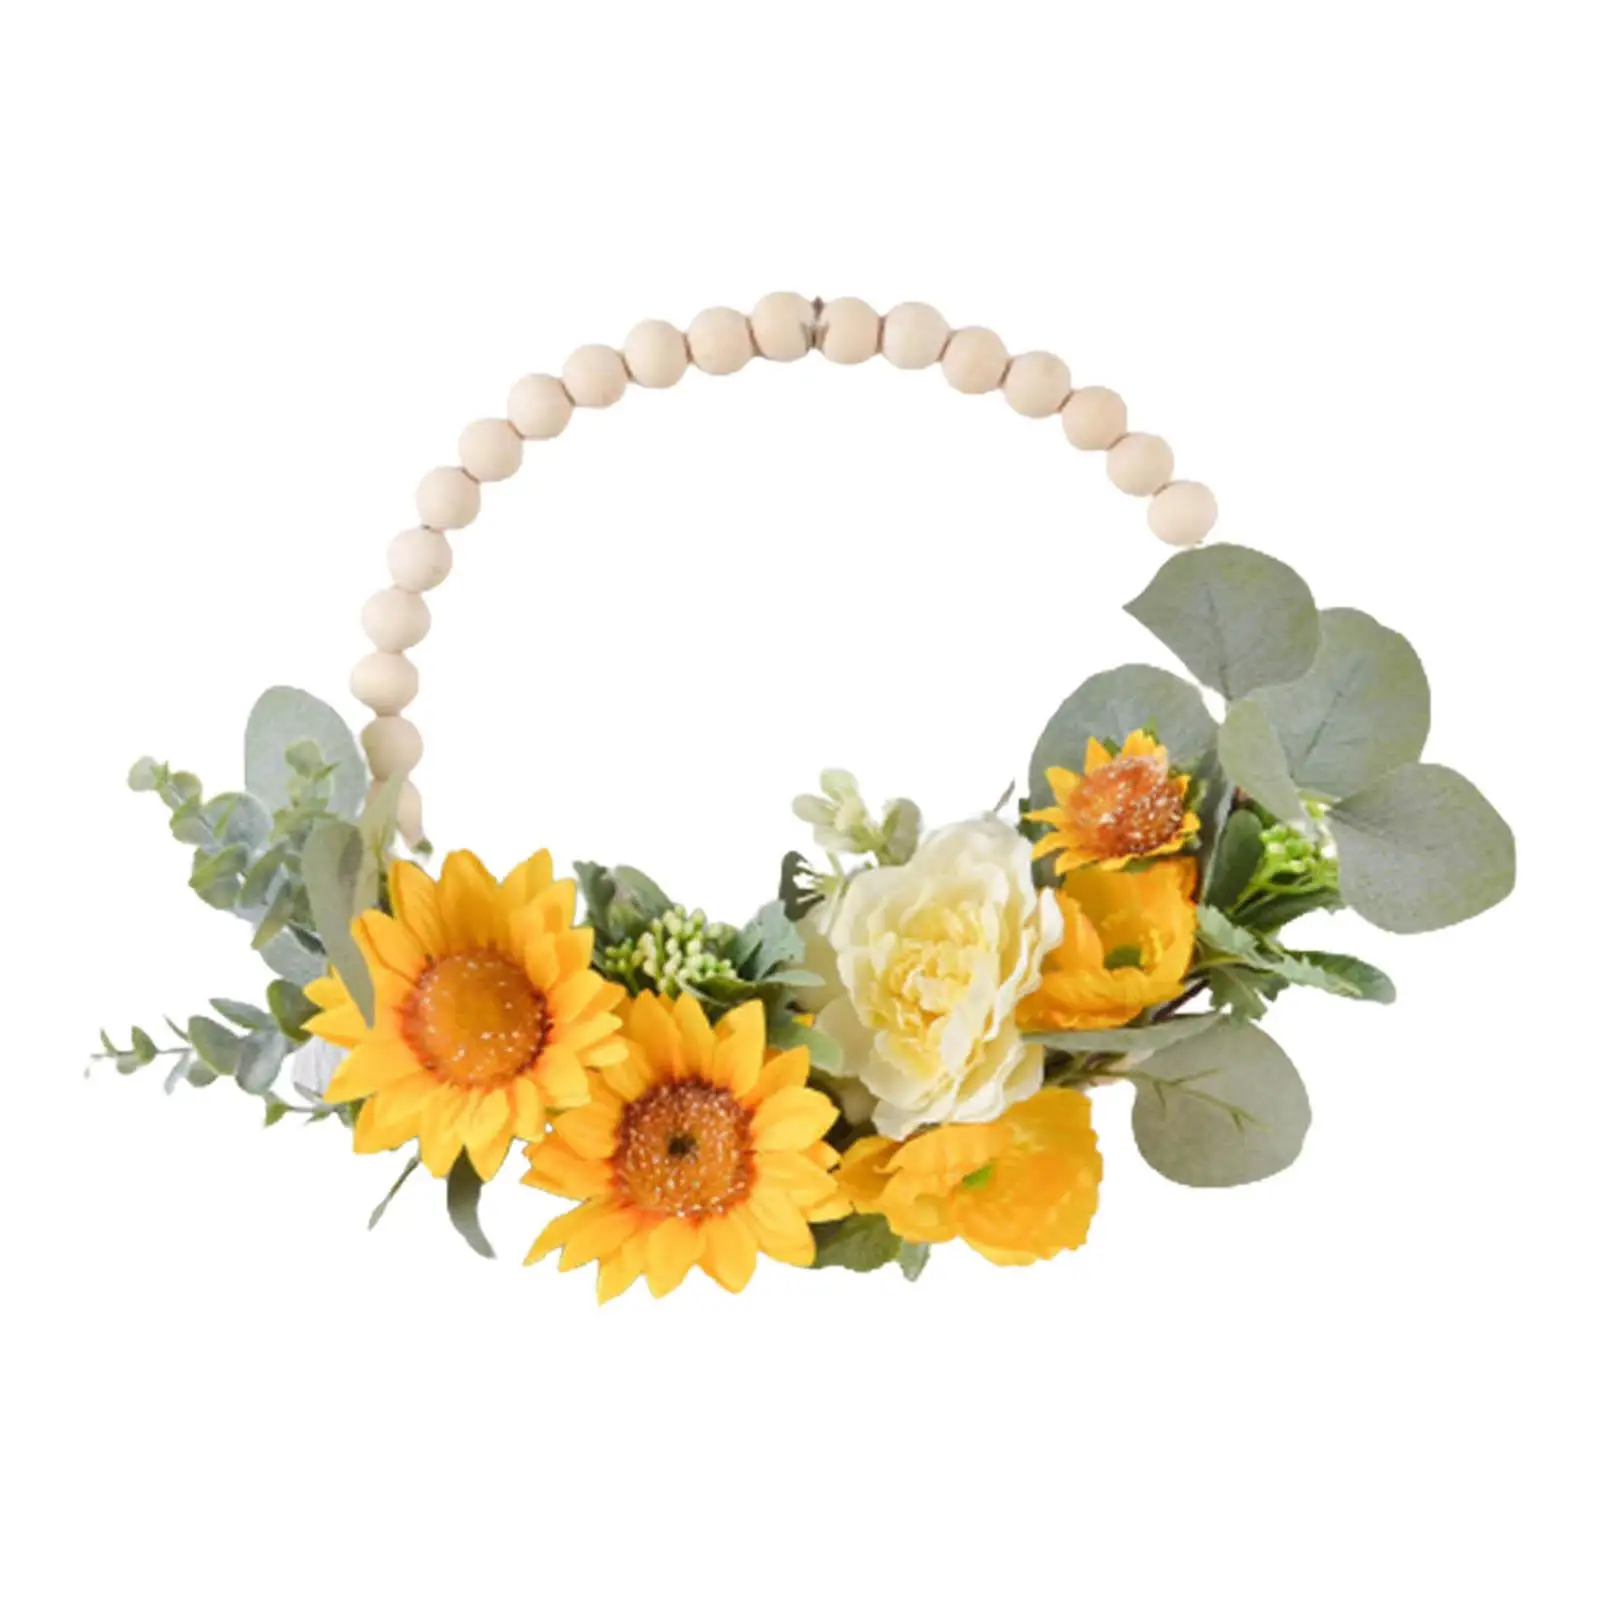 Artificial Wooden Beads Wreath Eucalyptus Leaf Wreath for Party Window Holiday Decoration